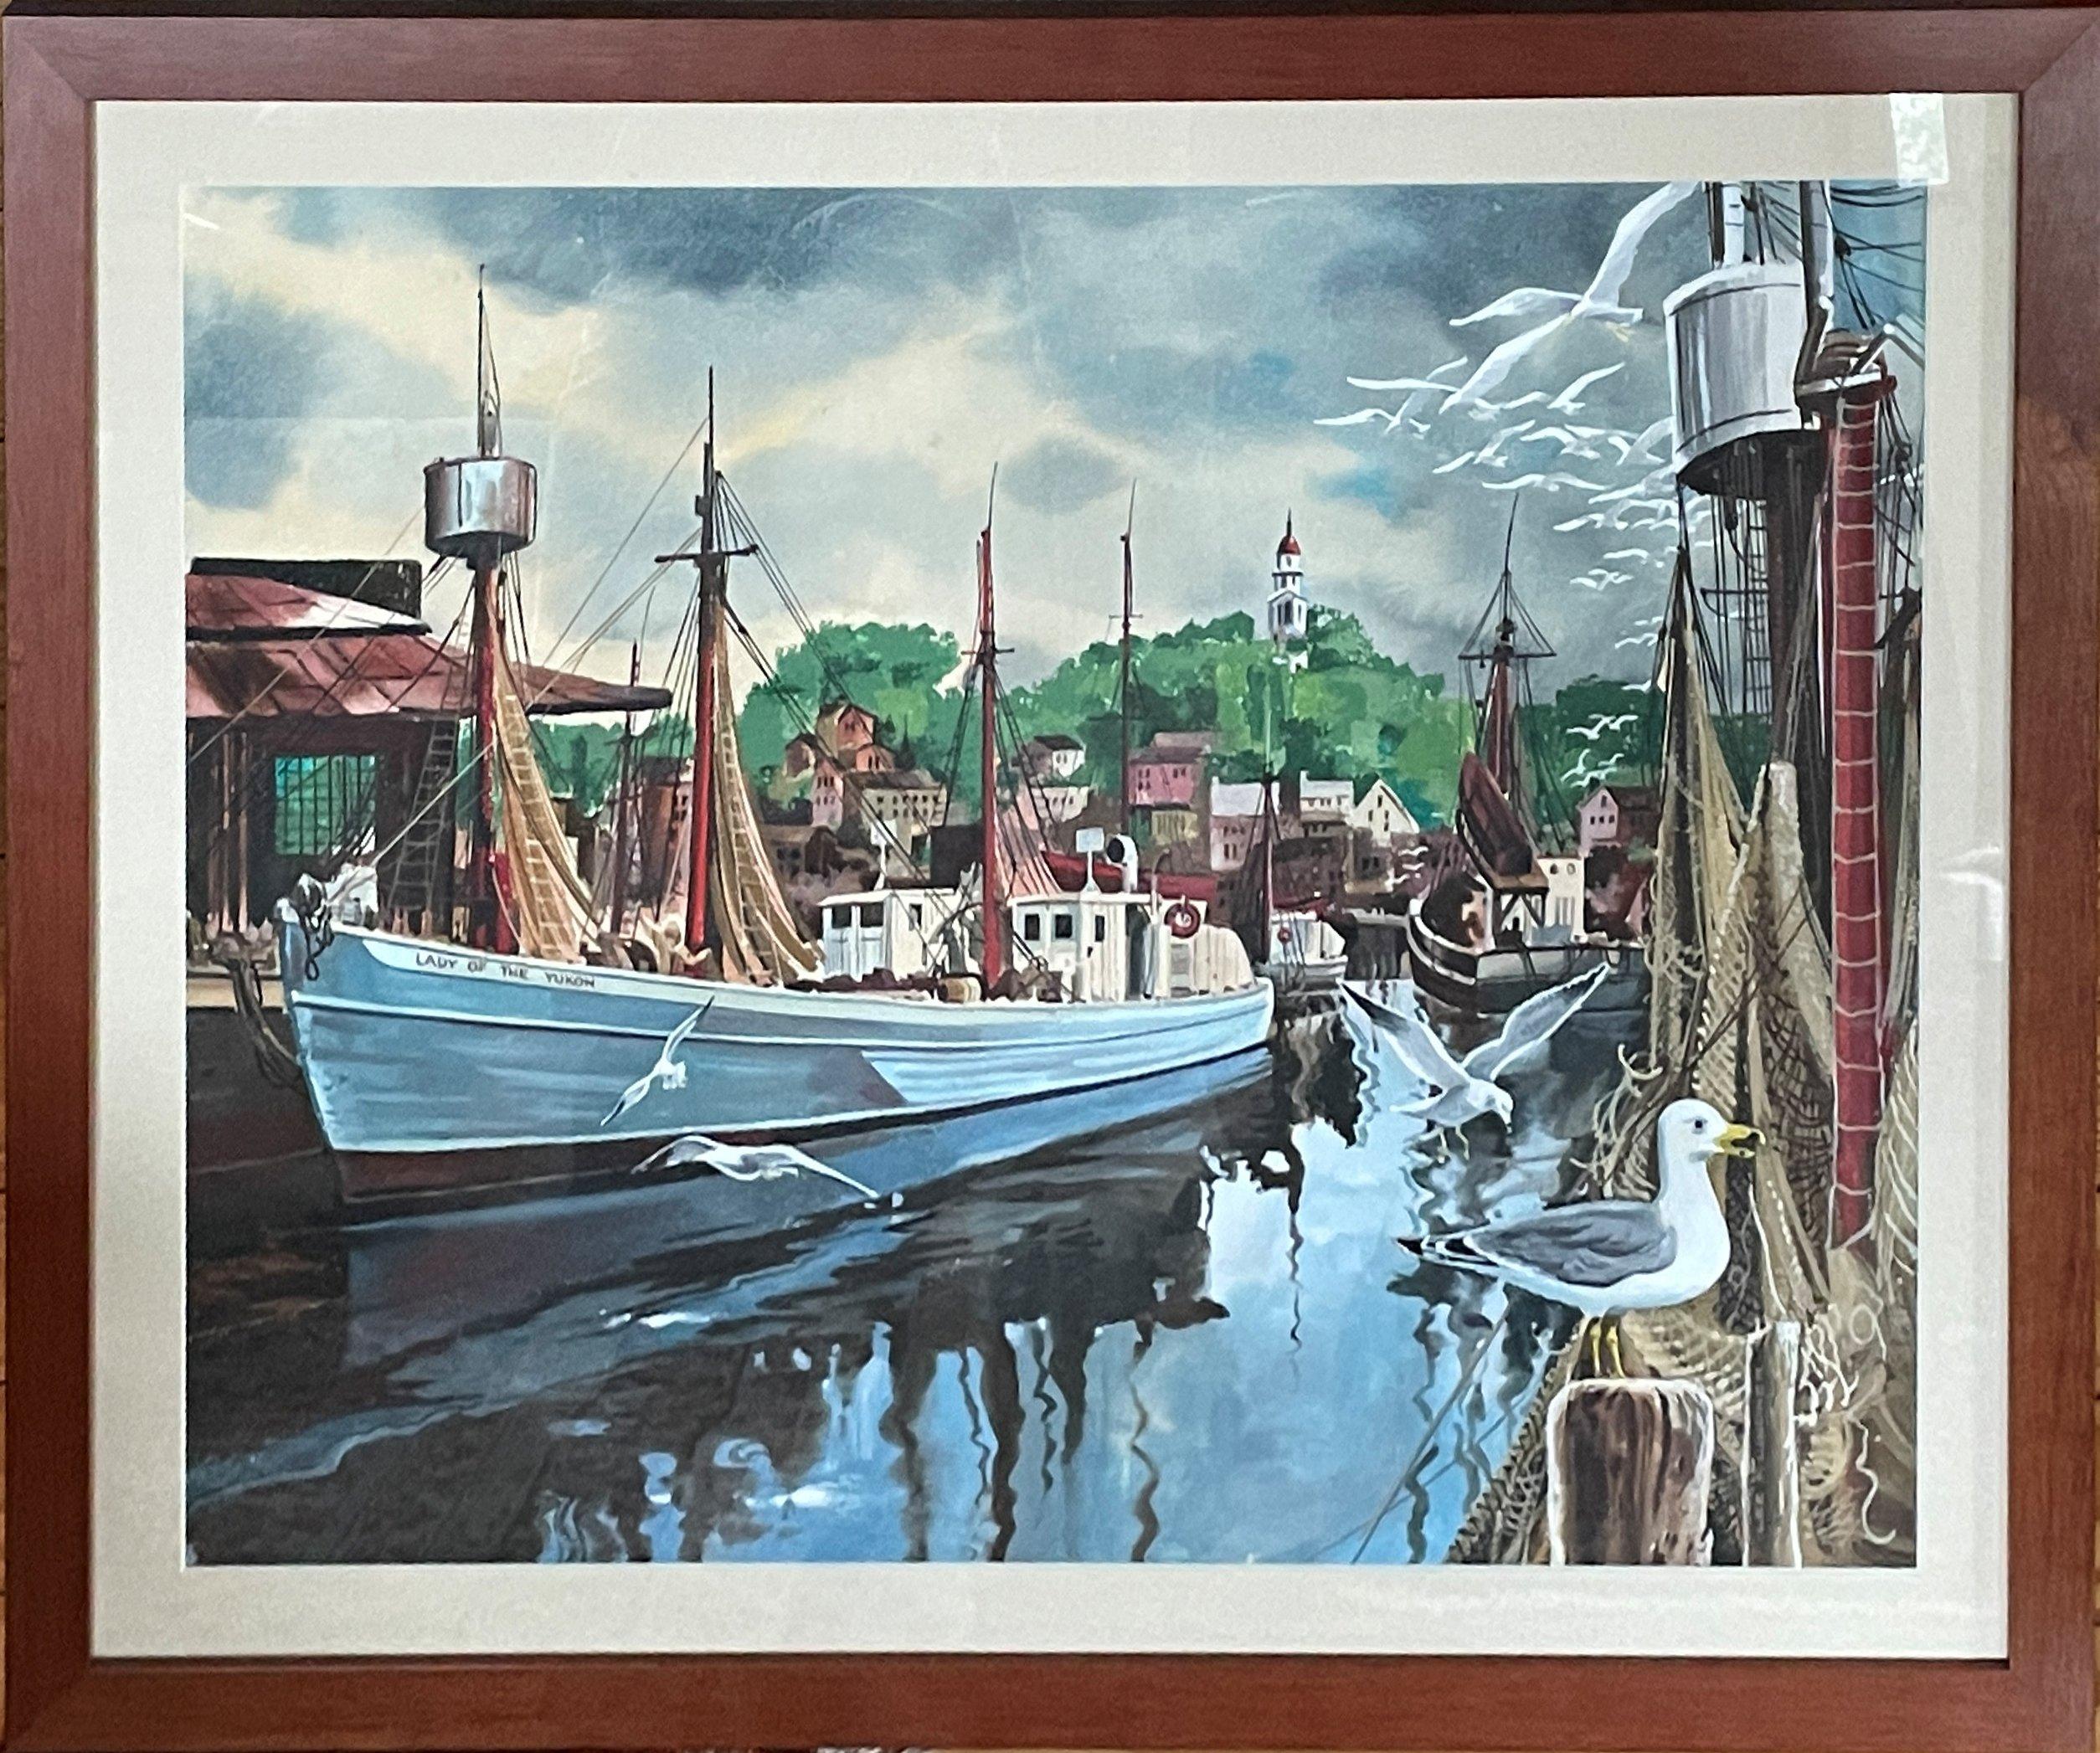 Lee F. Lindner (1934 - 2012)
Lady of the Yukon, Boats in the Harbor
Watercolor on paper
21 x 26 1/2 inches
Signed lower right

Born on May 29, 1934 in Milwaukee, Wis., he was the son of Henry L. and Helen Wielebski Lindner. A resident of the area